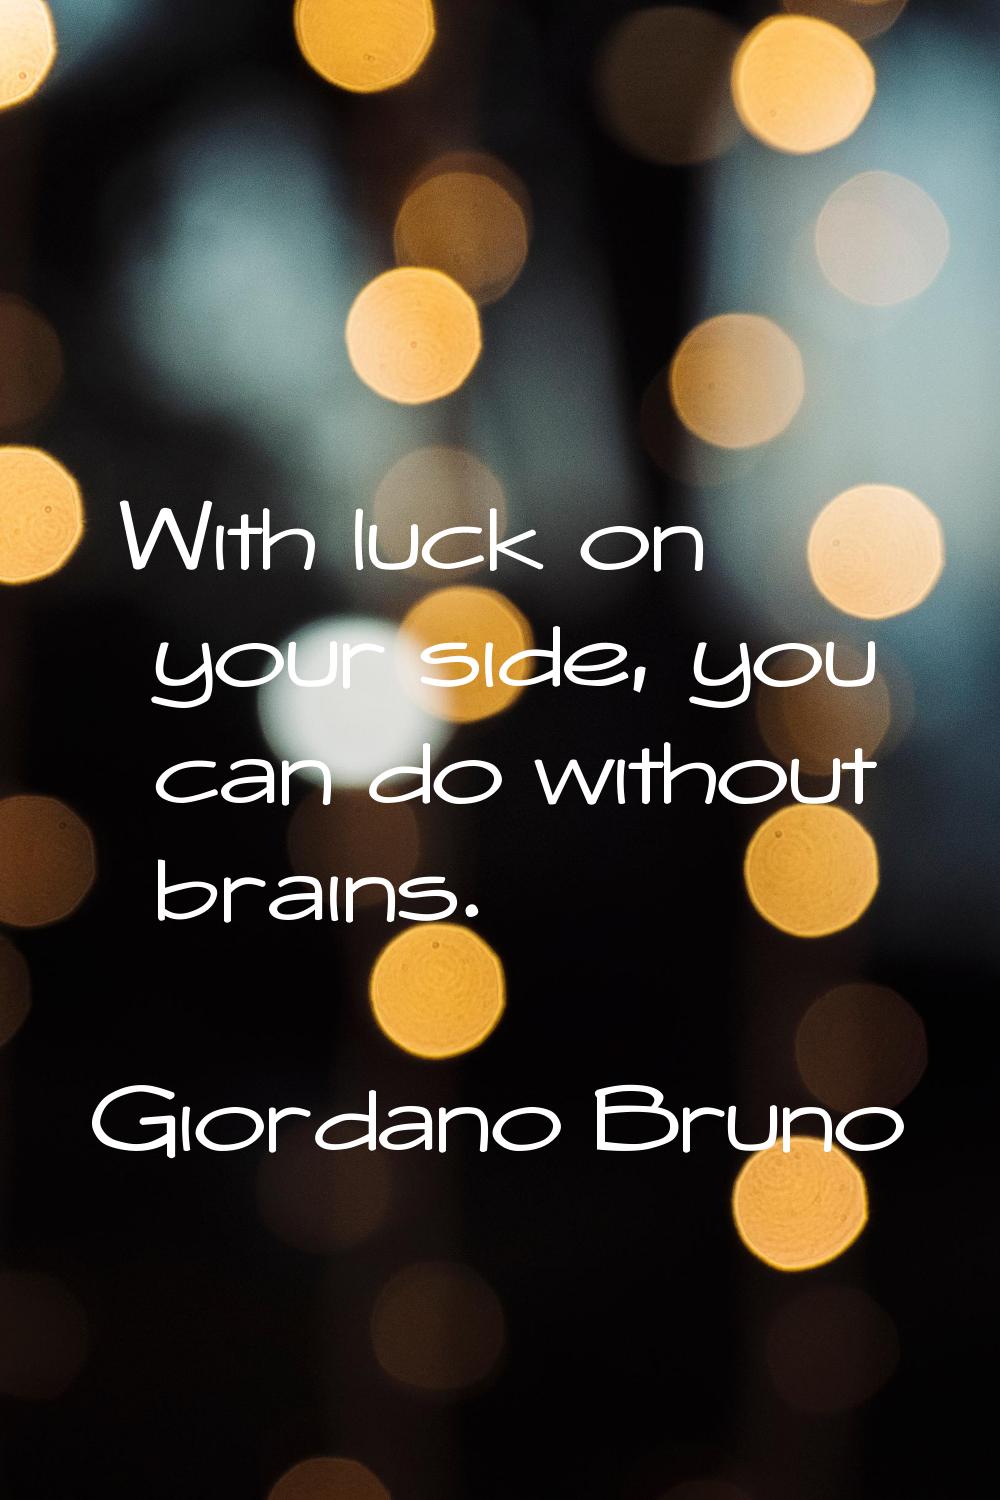 With luck on your side, you can do without brains.